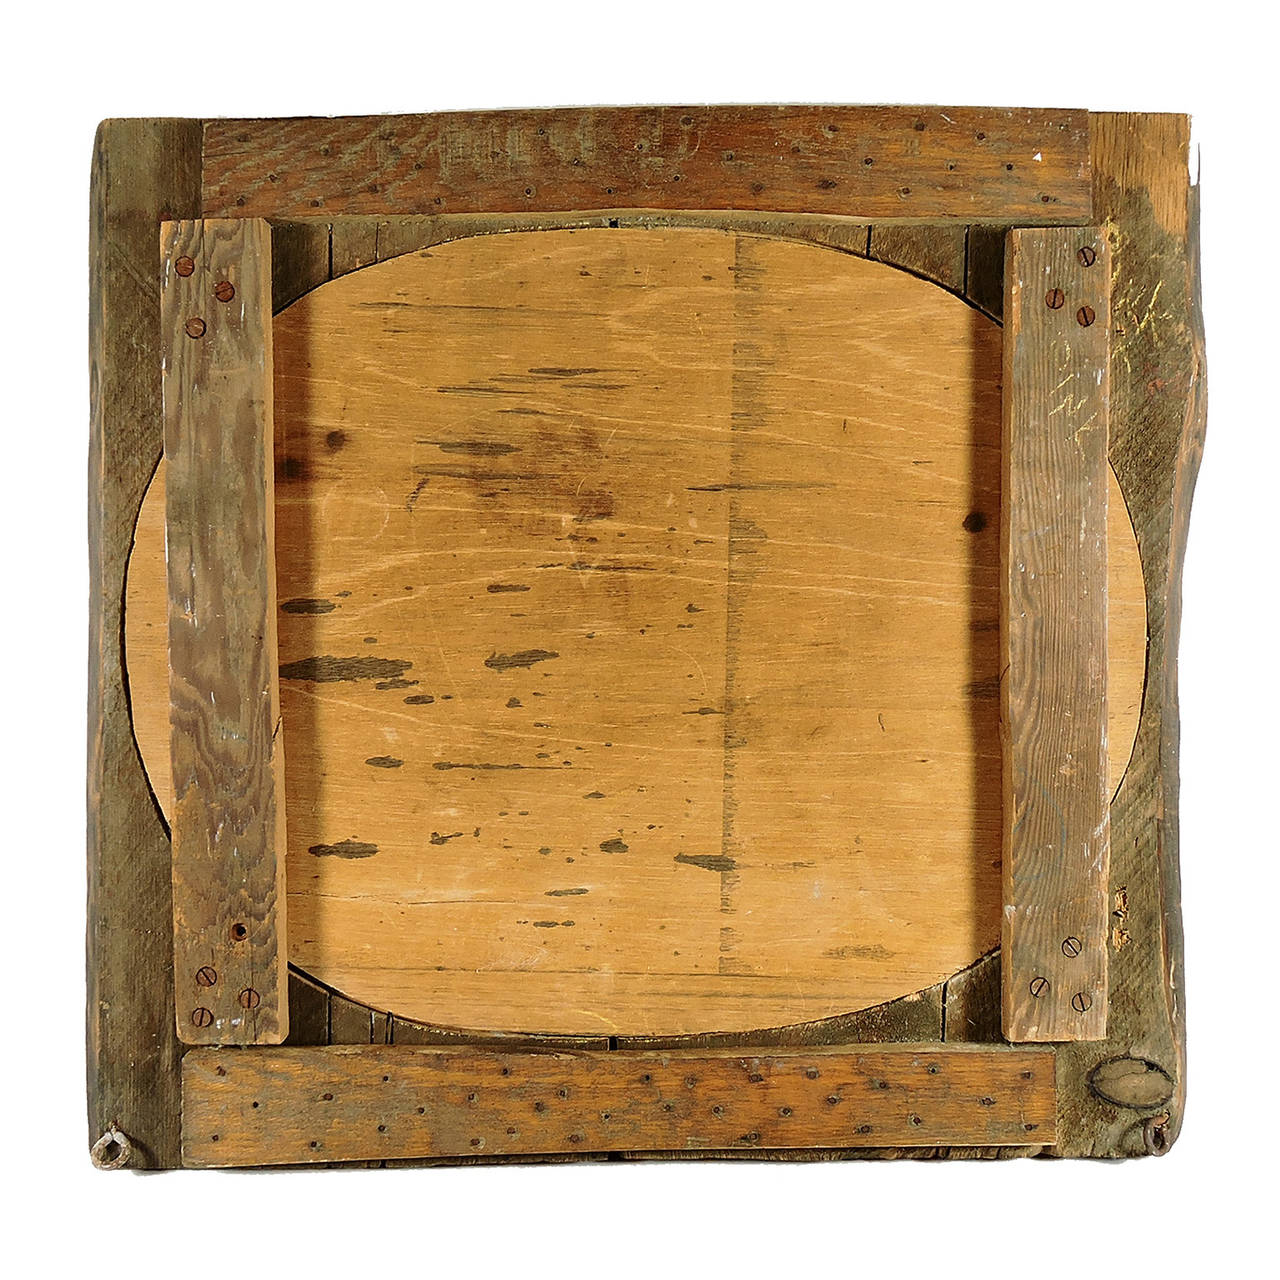 Rustic carved Folk Art wood mirror.
Dimensions: 28.5 × 31 × 3.5 inches.